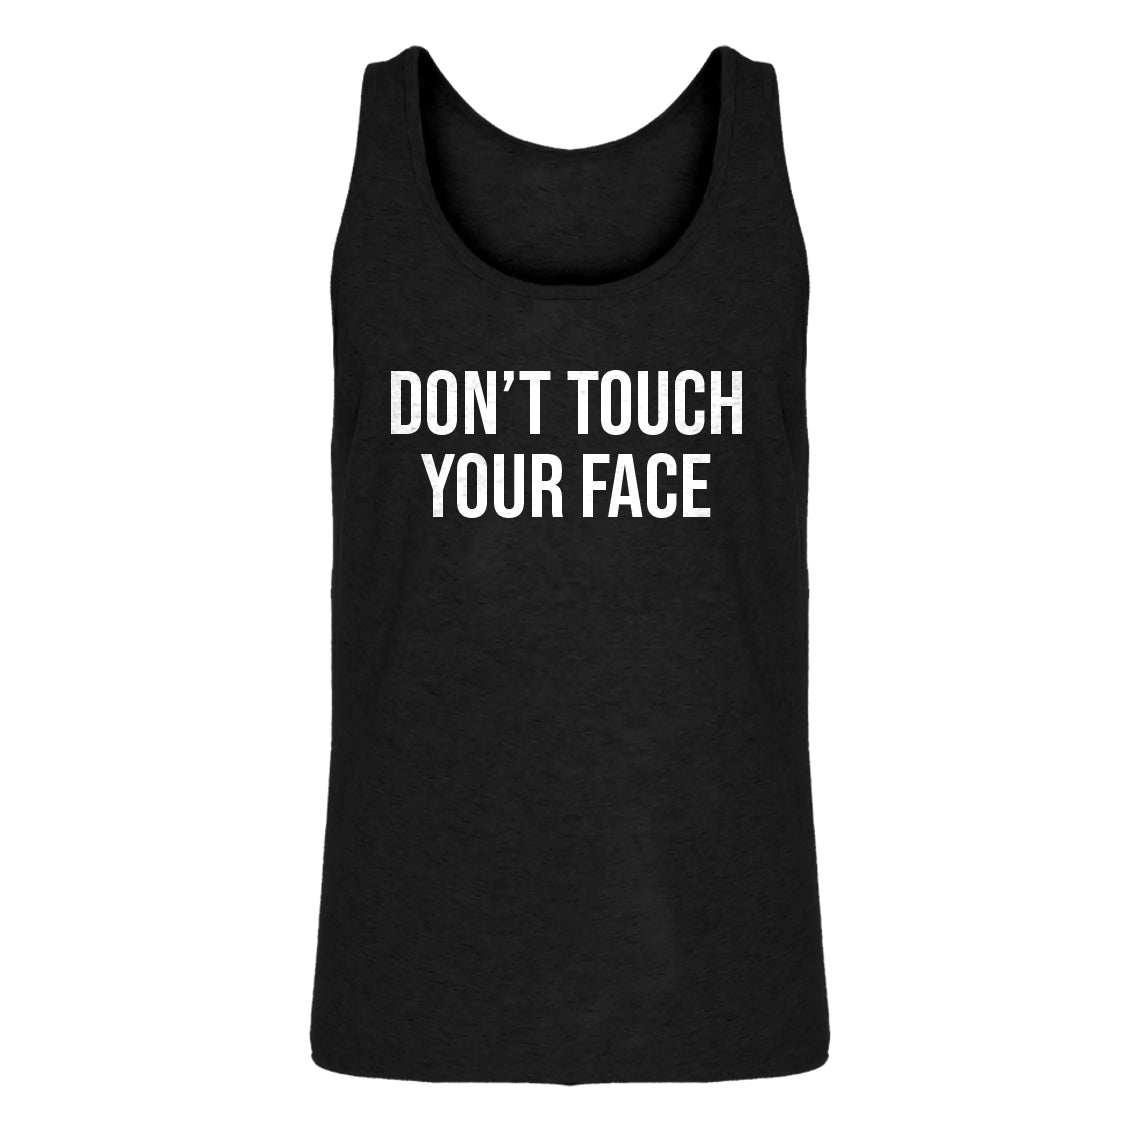 Mens DON'T TOUCH YOUR FACE Jersey Tank Top